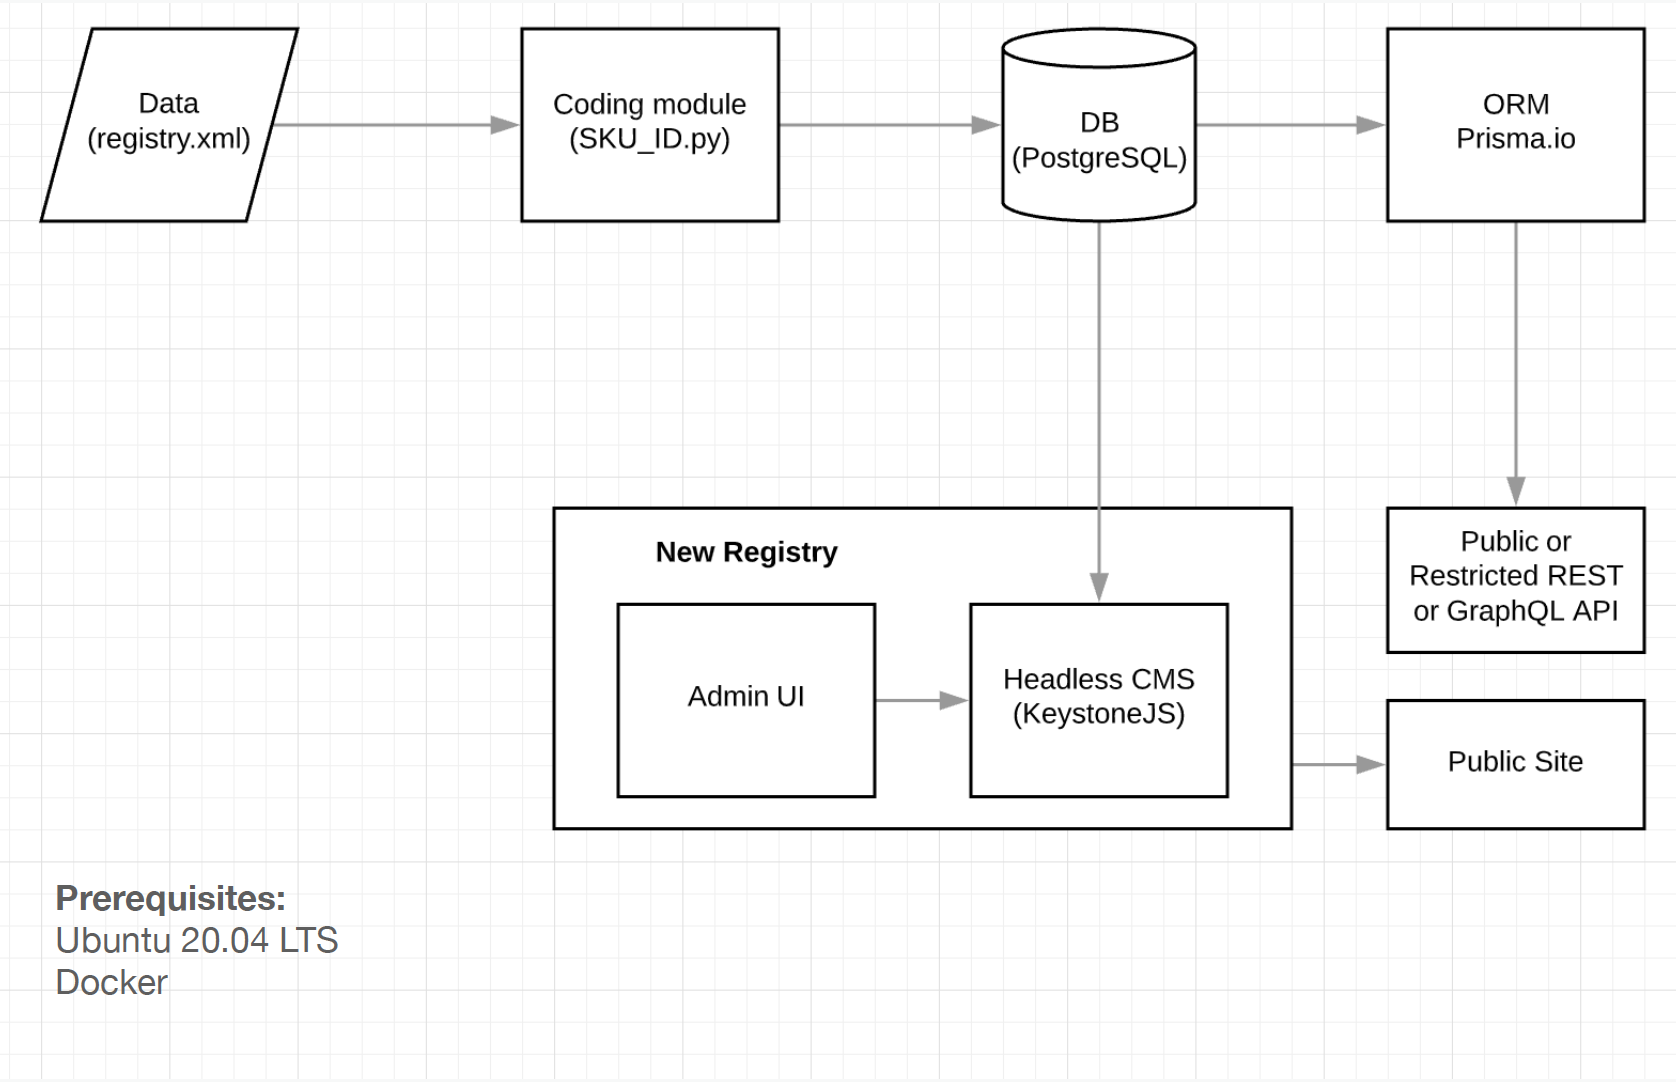 Research abstract:  Open-source technology stack for creating registries seeding interoperable data via REST and GraphQL API